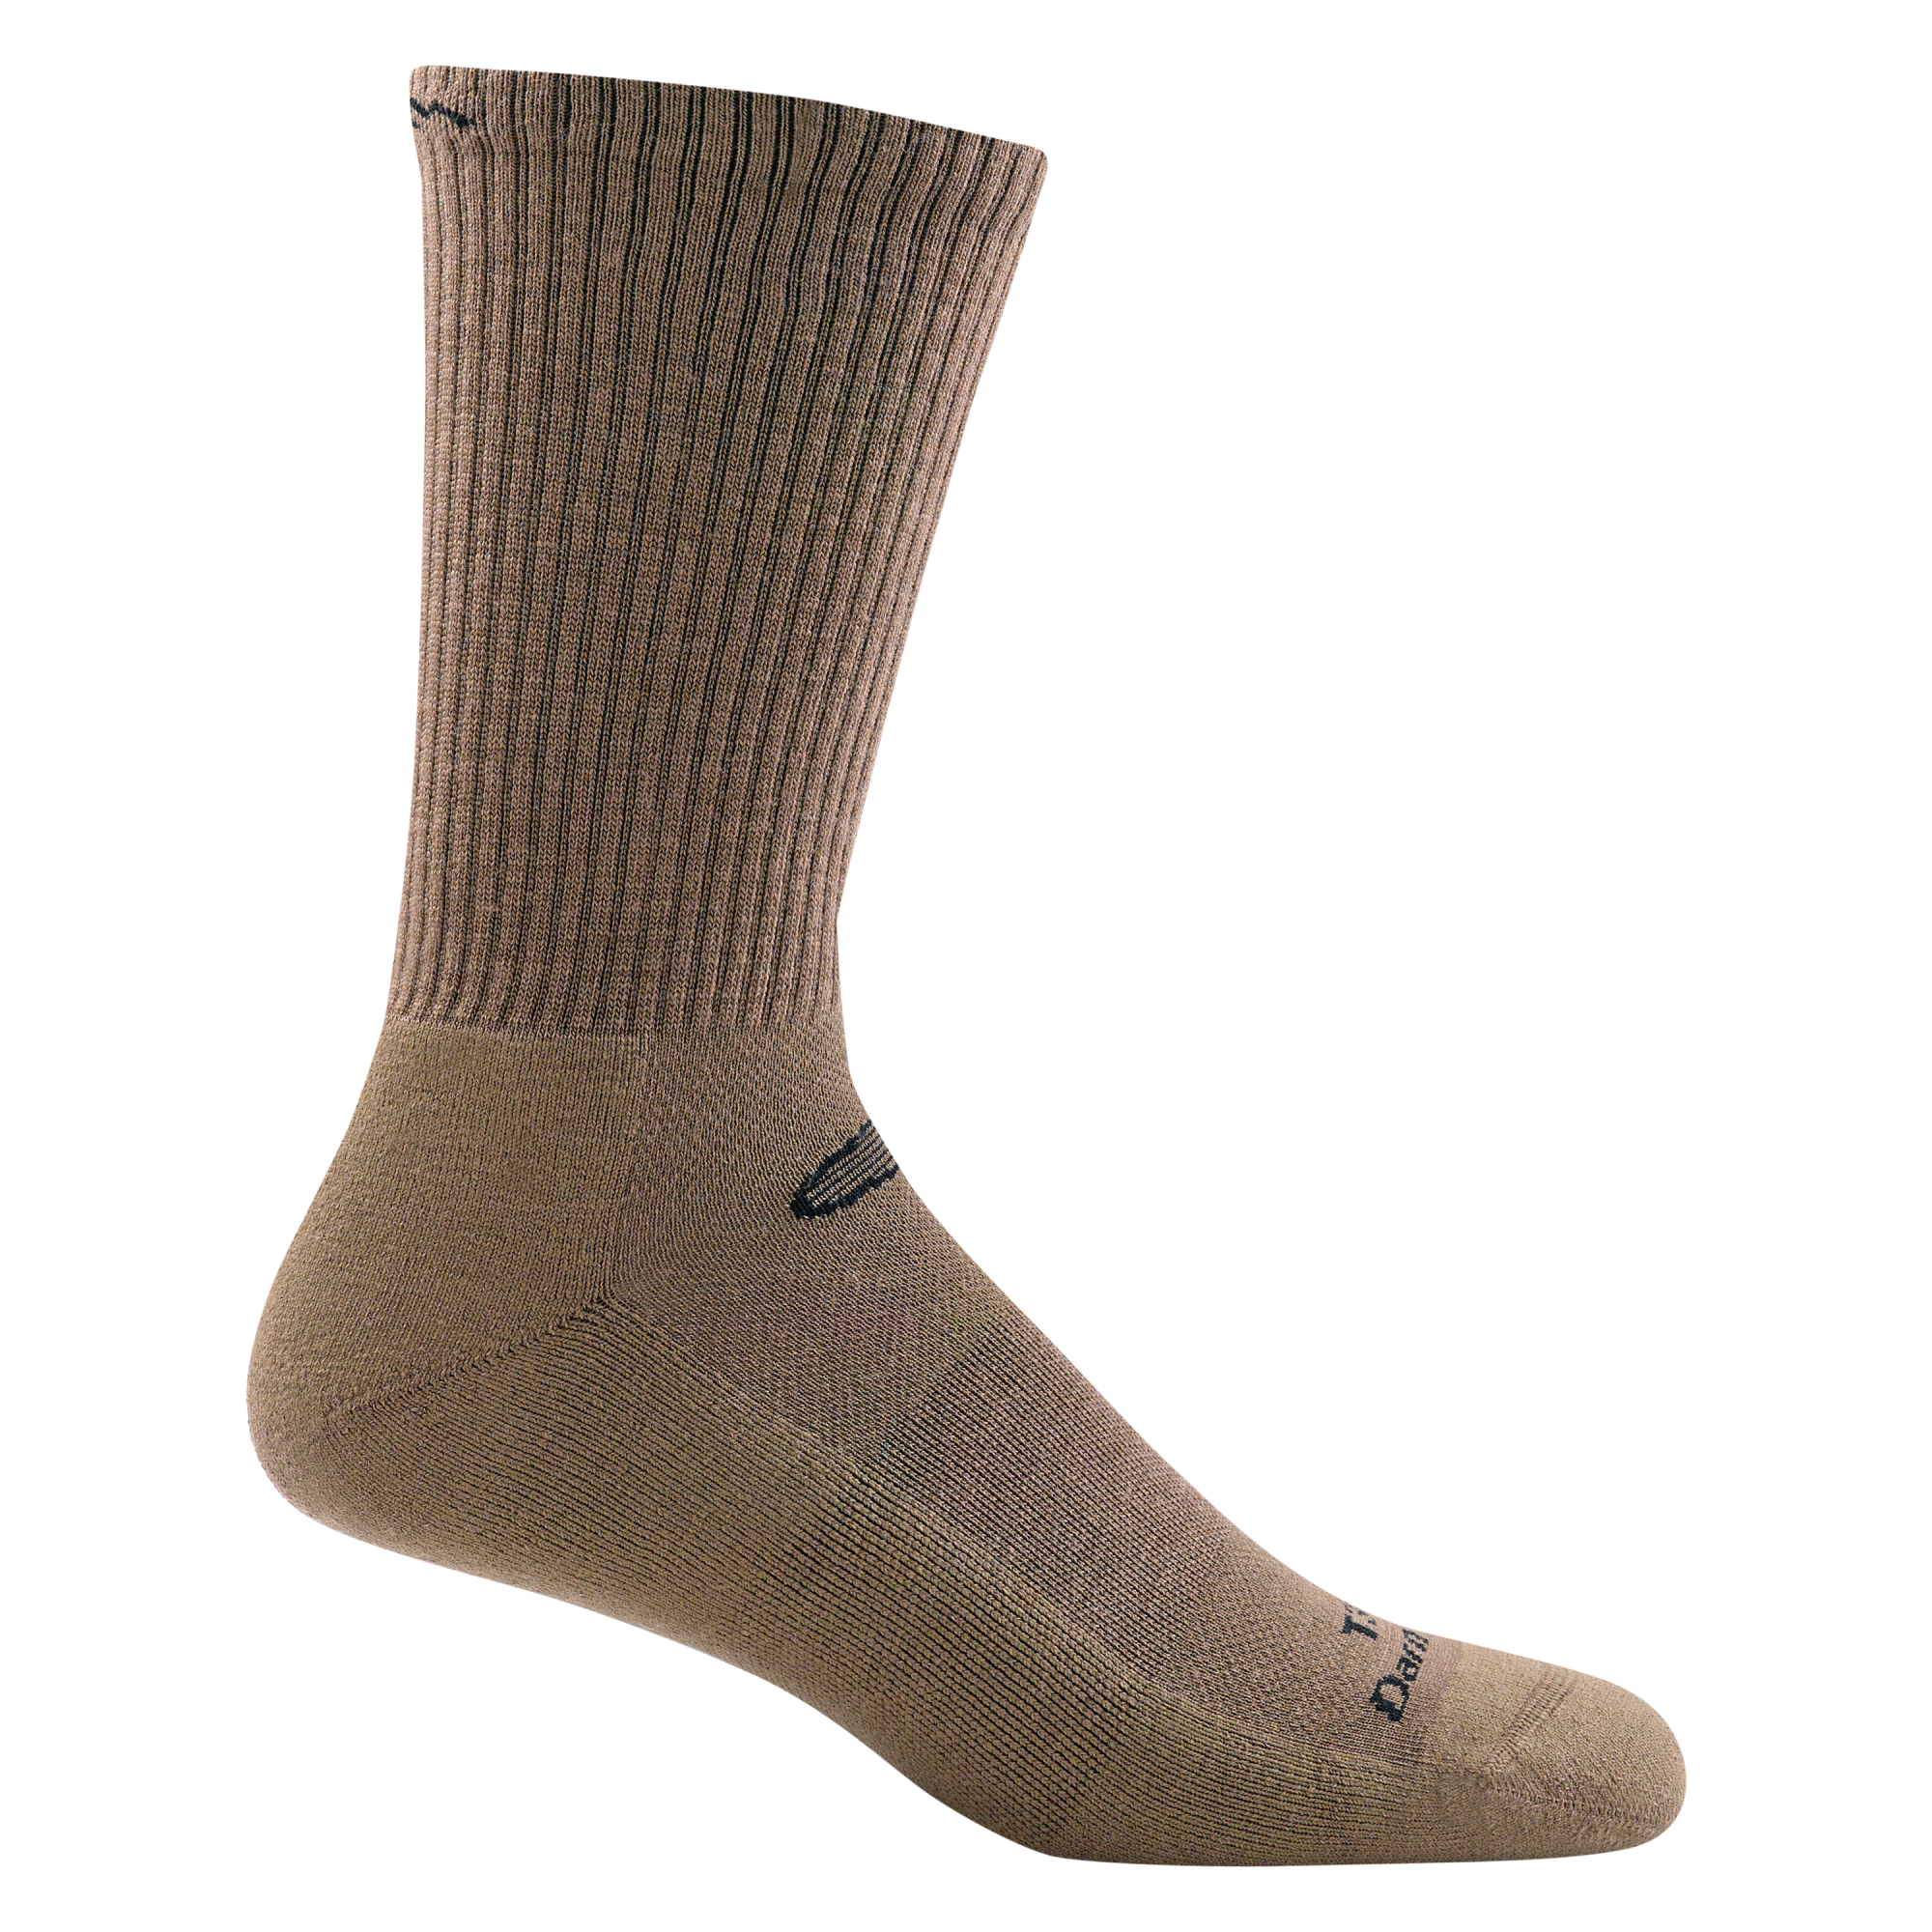 T3001 unisex micro crew lightweight tactical sock in color coyote brown with black darn tough signature on forefoot